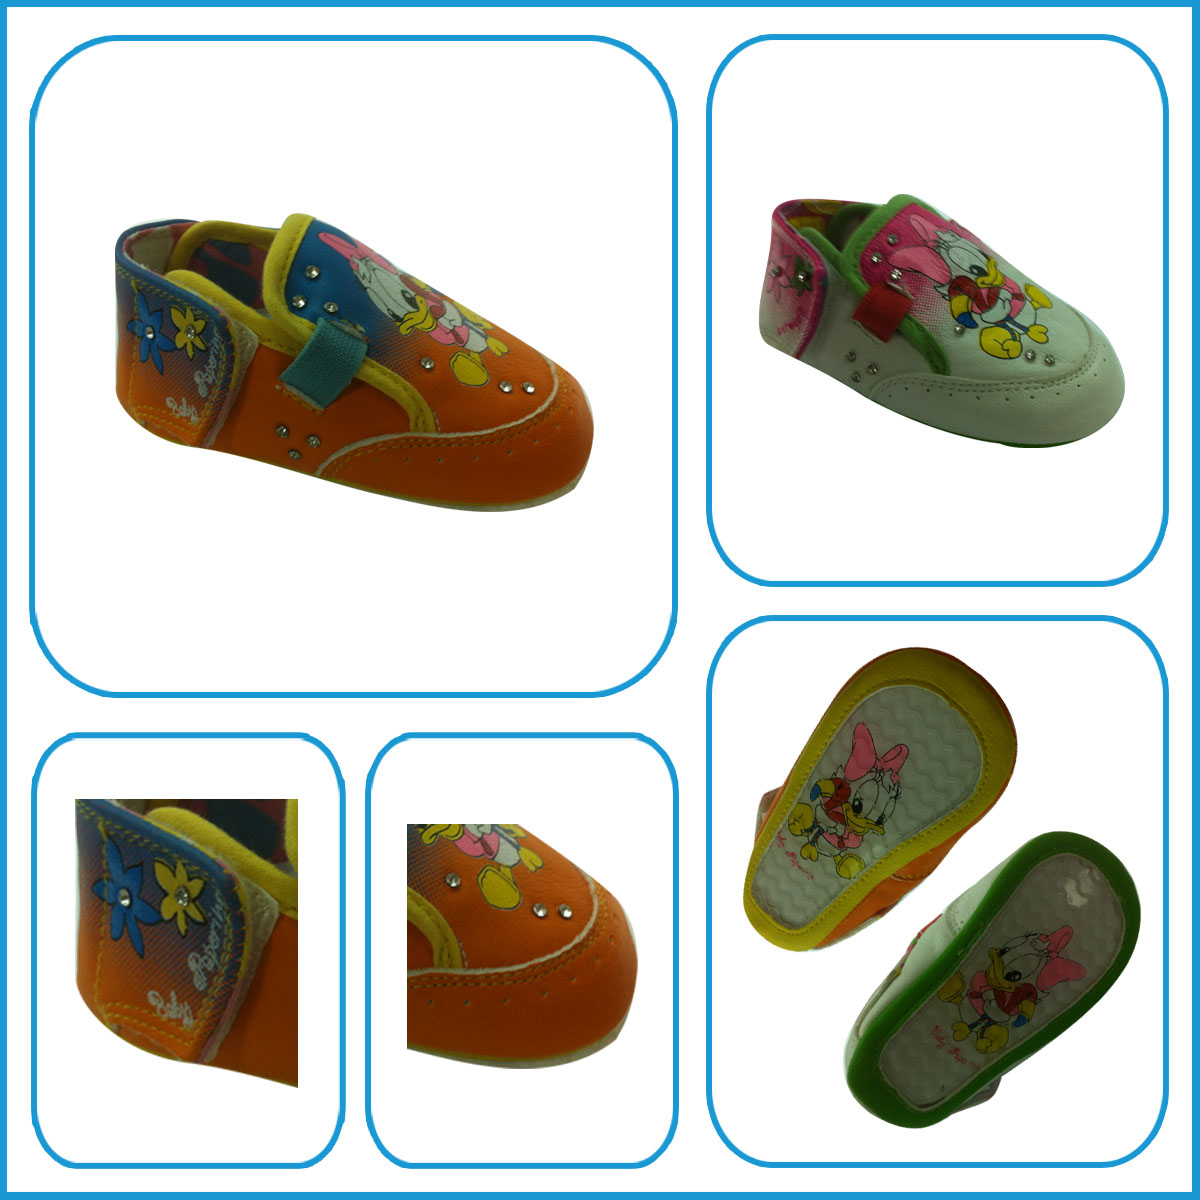 CHINA COBRA newest top quality soft sole Lovely cartoon style cute baby moccasins baby shoes size 0-6 years